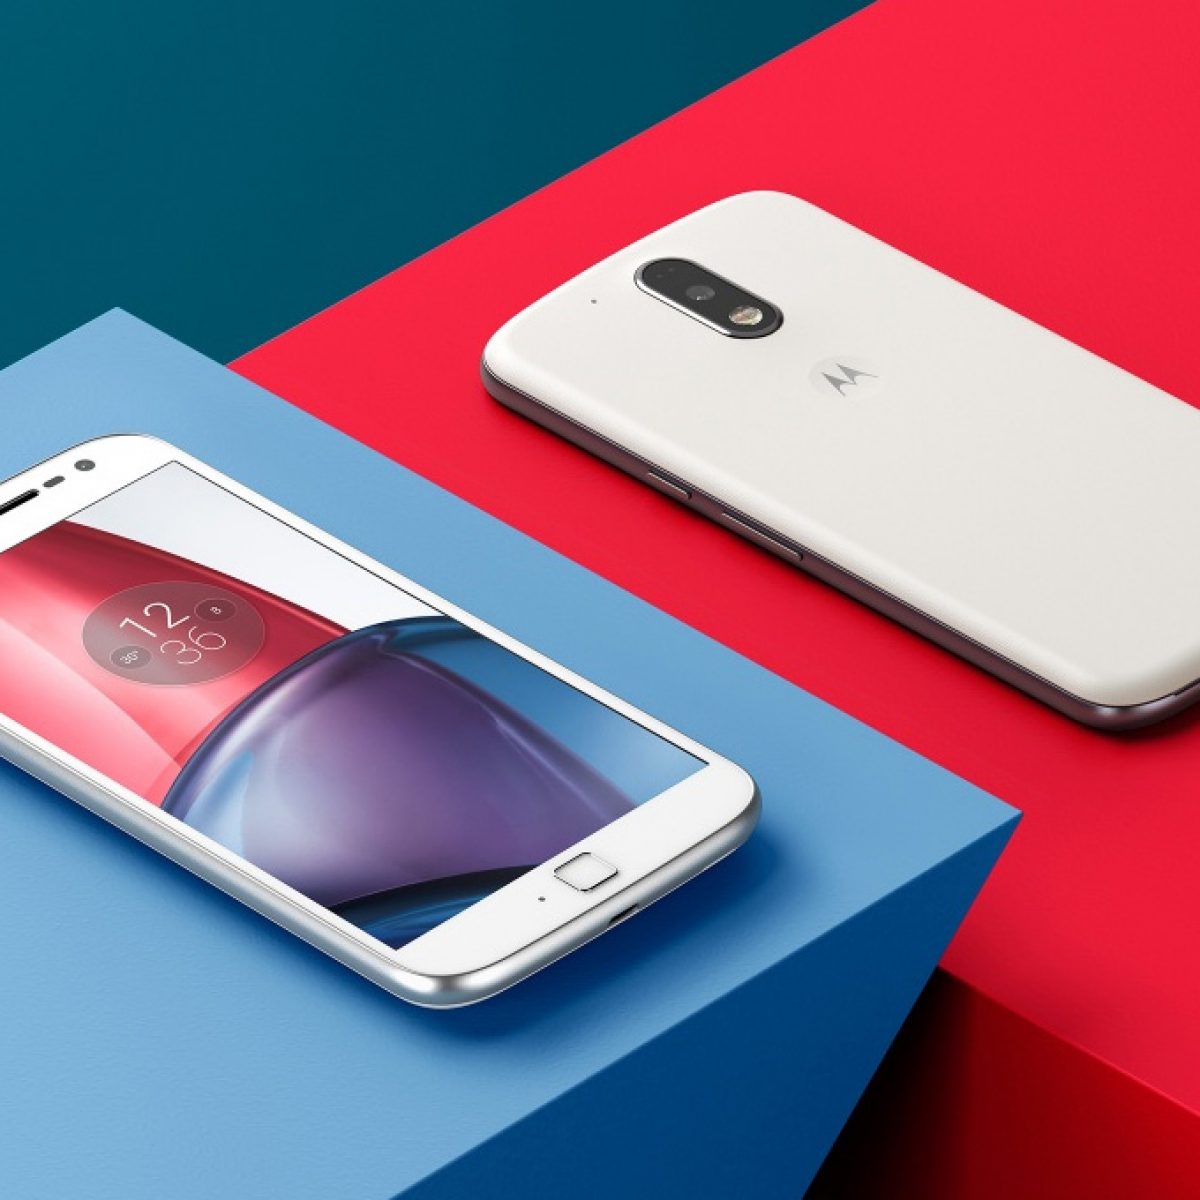 Pre-Orders Open for Moto G4 and Moto G4 Plus in US, Starting at $199